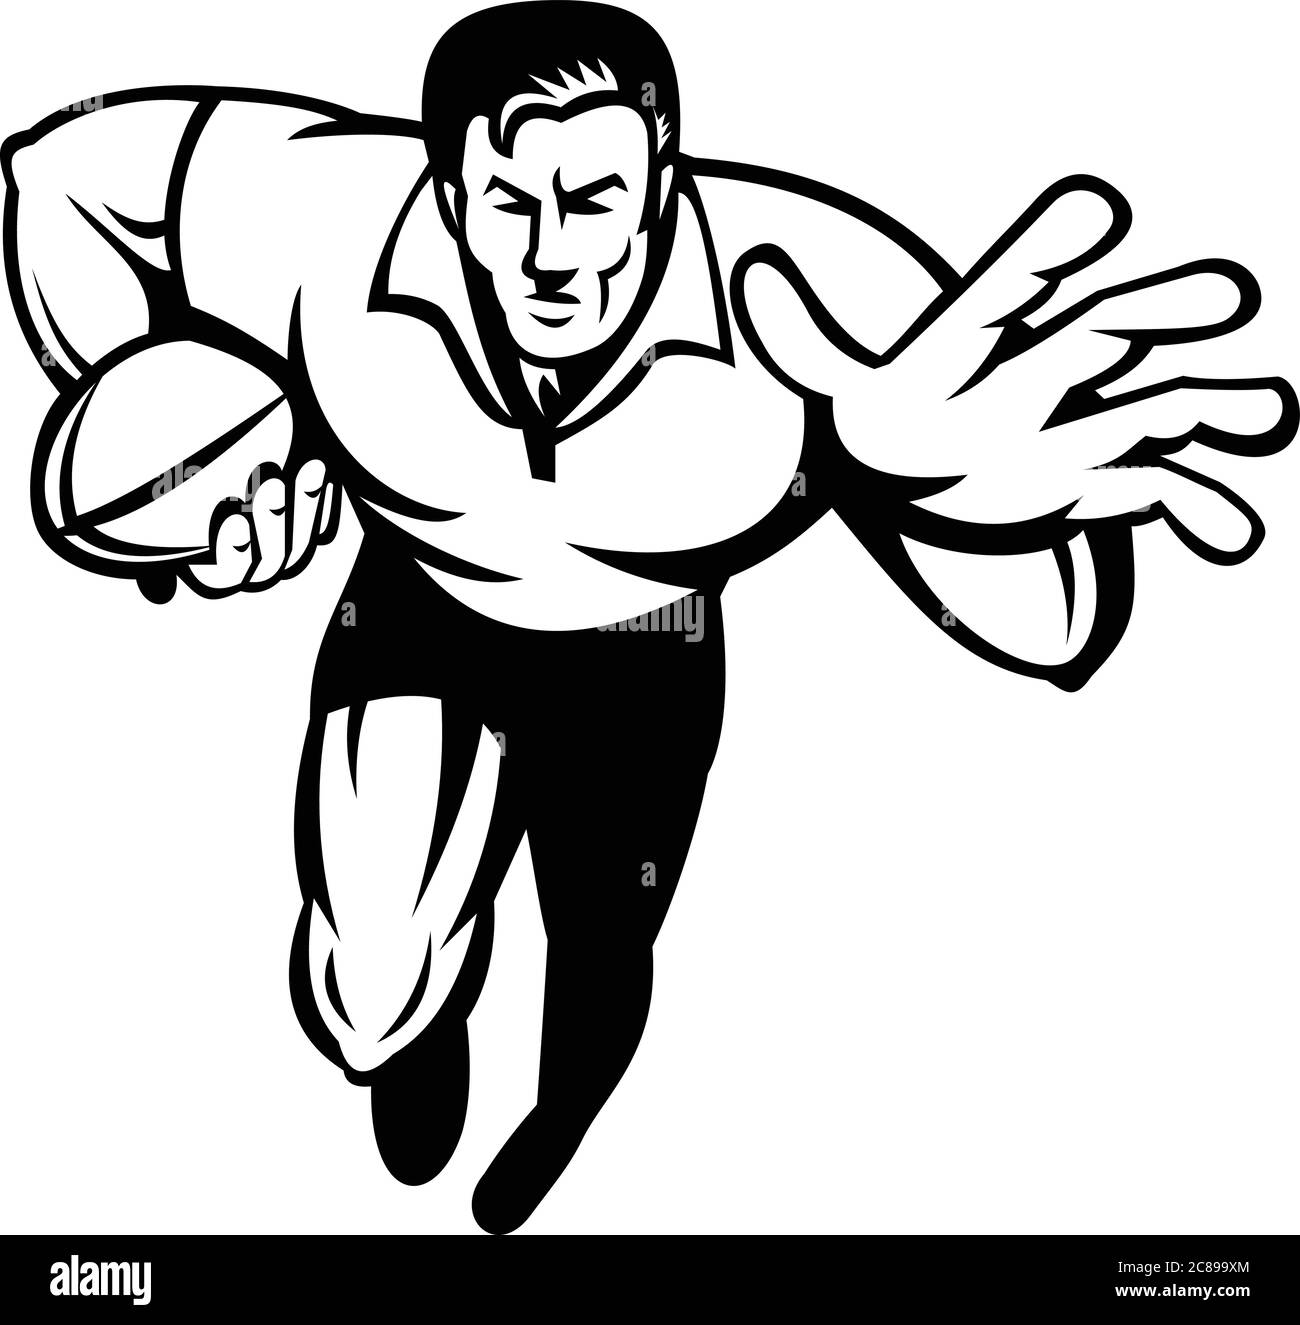 Retro black and white style illustration of a rugby player running with ball fending off with other hand viewed from front on isolated background. Stock Vector